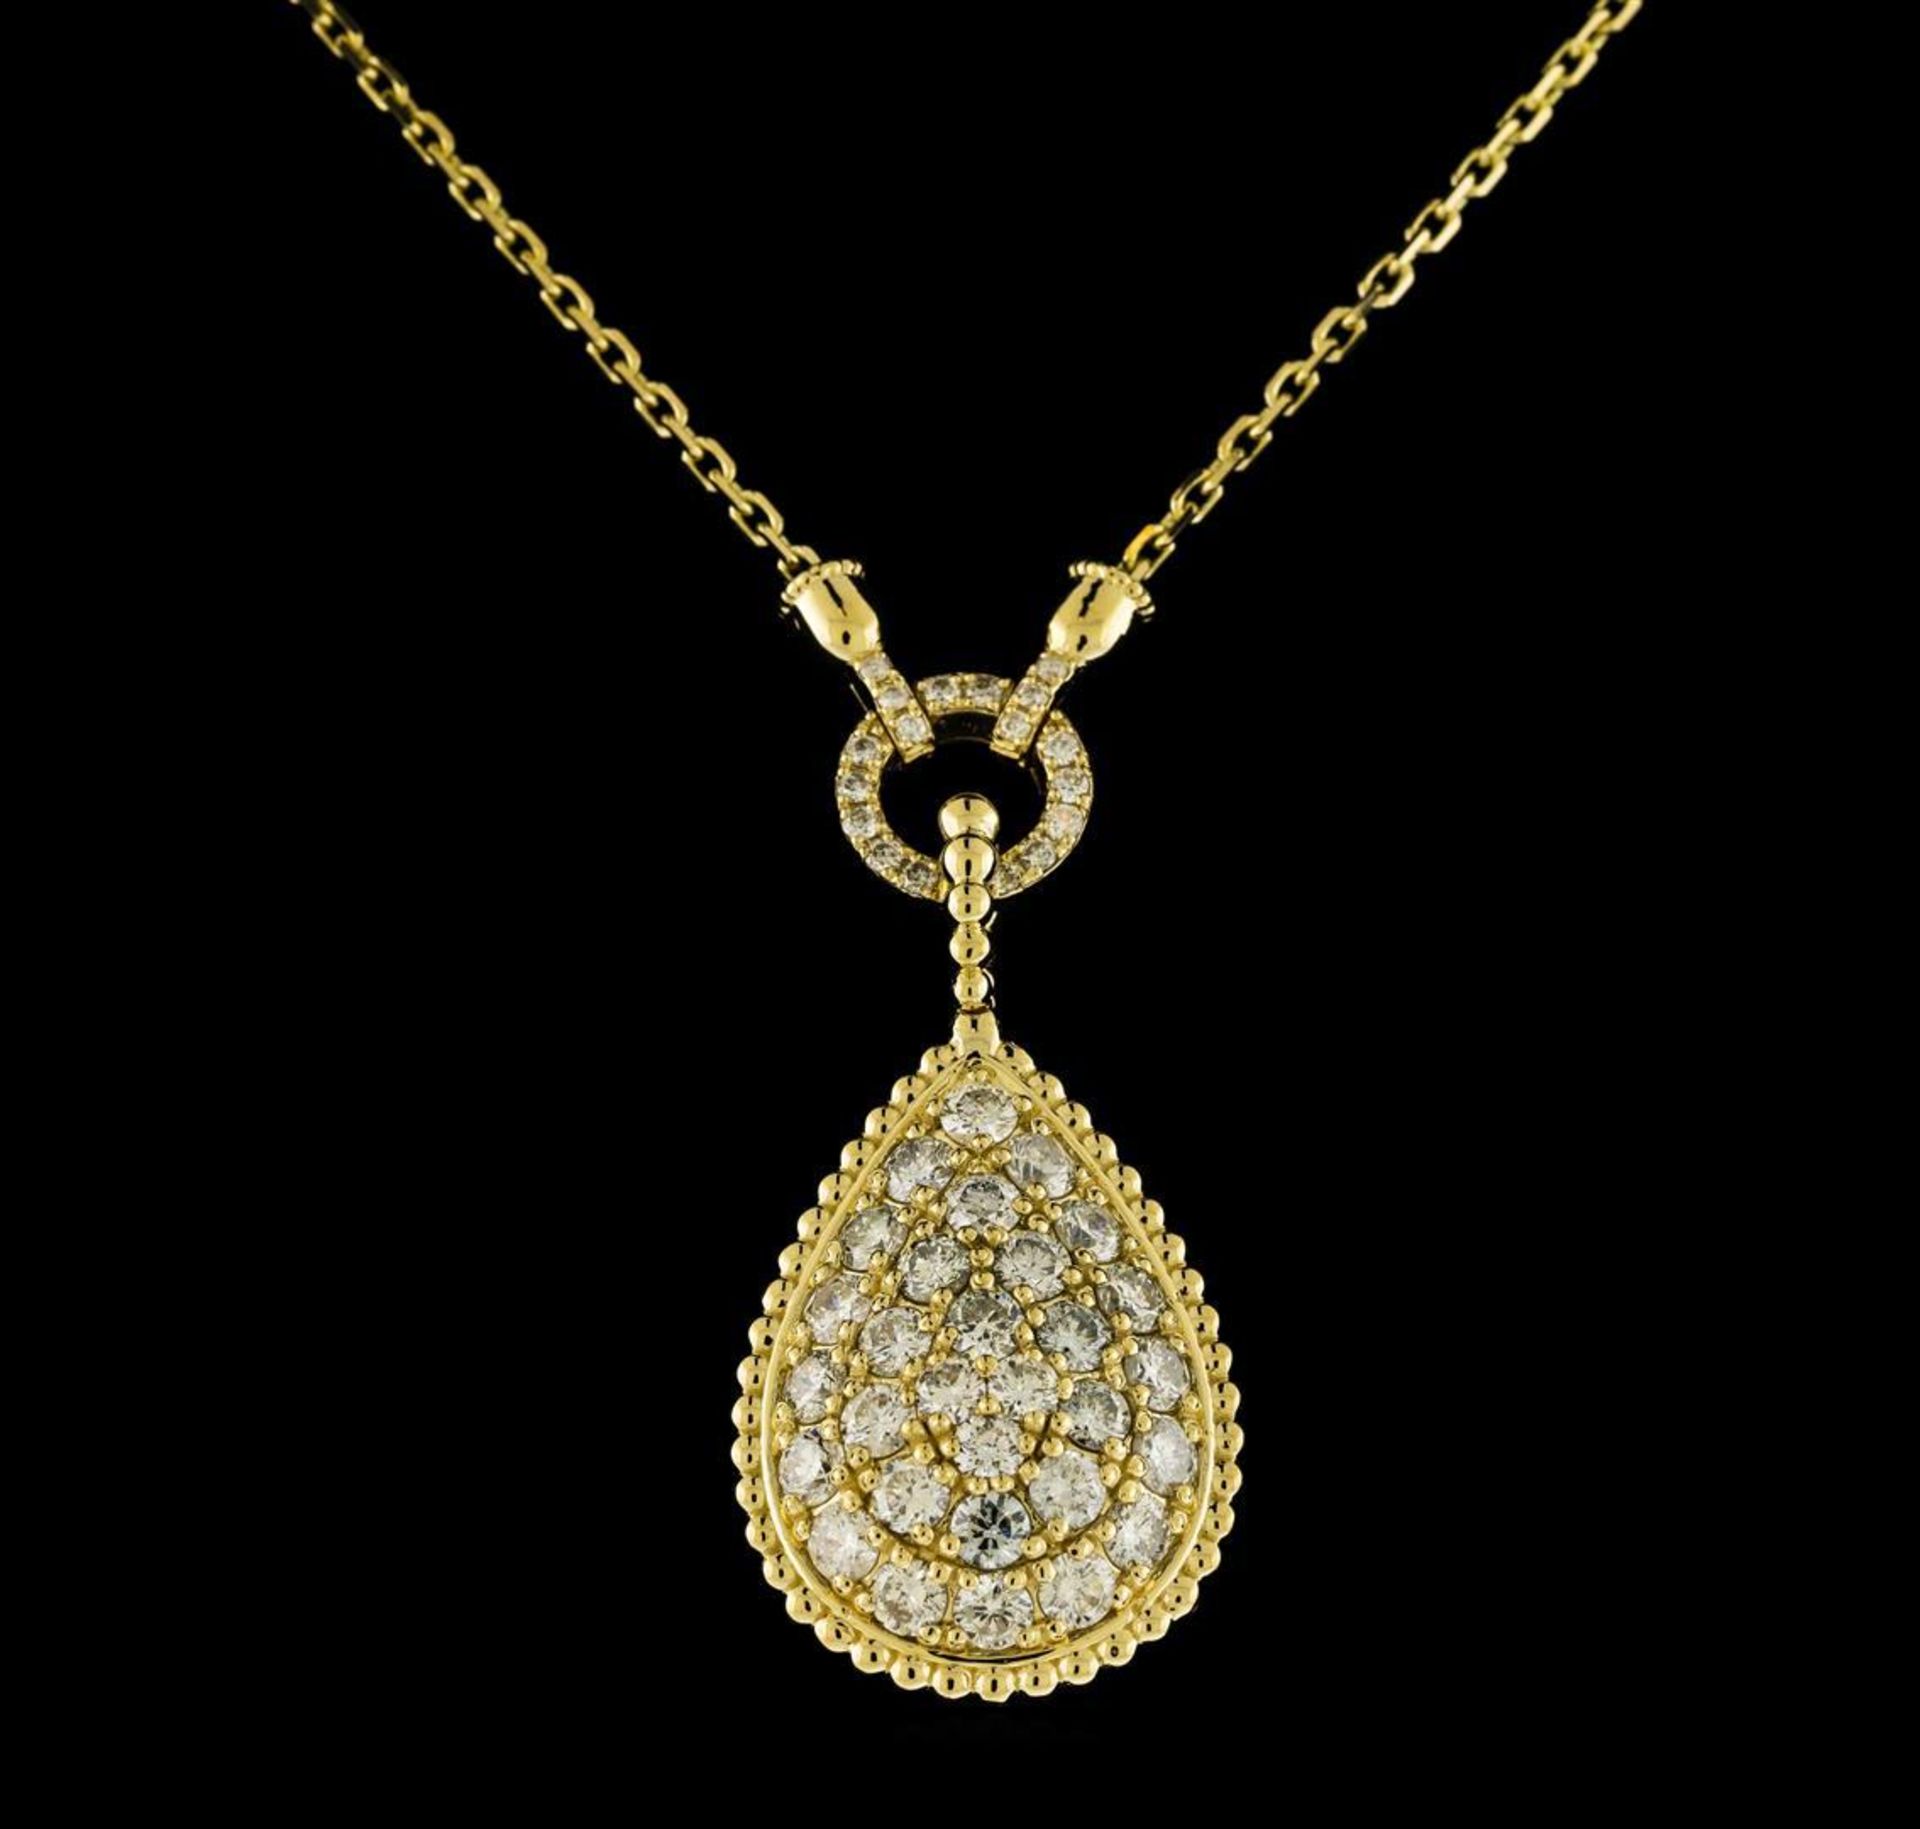 3.02 ctw Diamond Necklace - 14KT Yellow Gold - Image 2 of 3